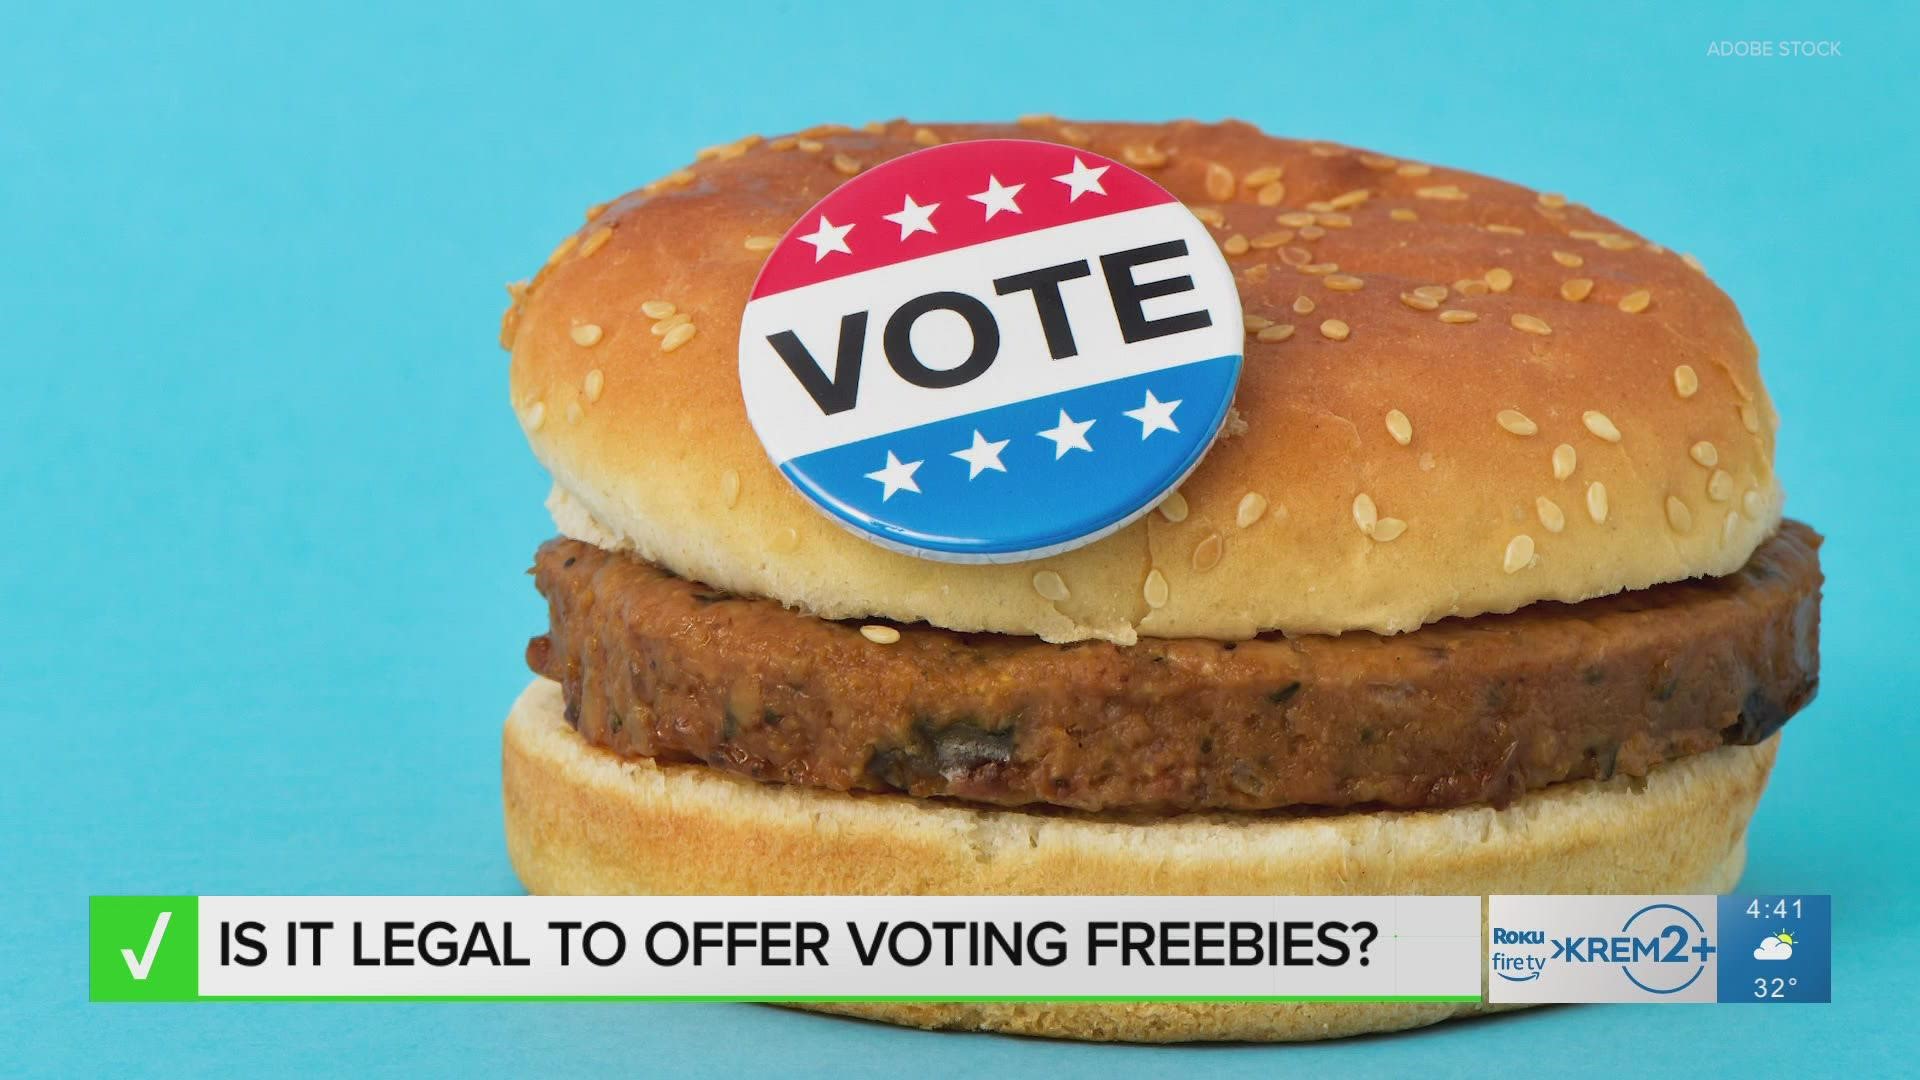 One viewer sent in a question: Is it illegal for businesses to offer freebies or discounts to voters? The Verify team was on the case.